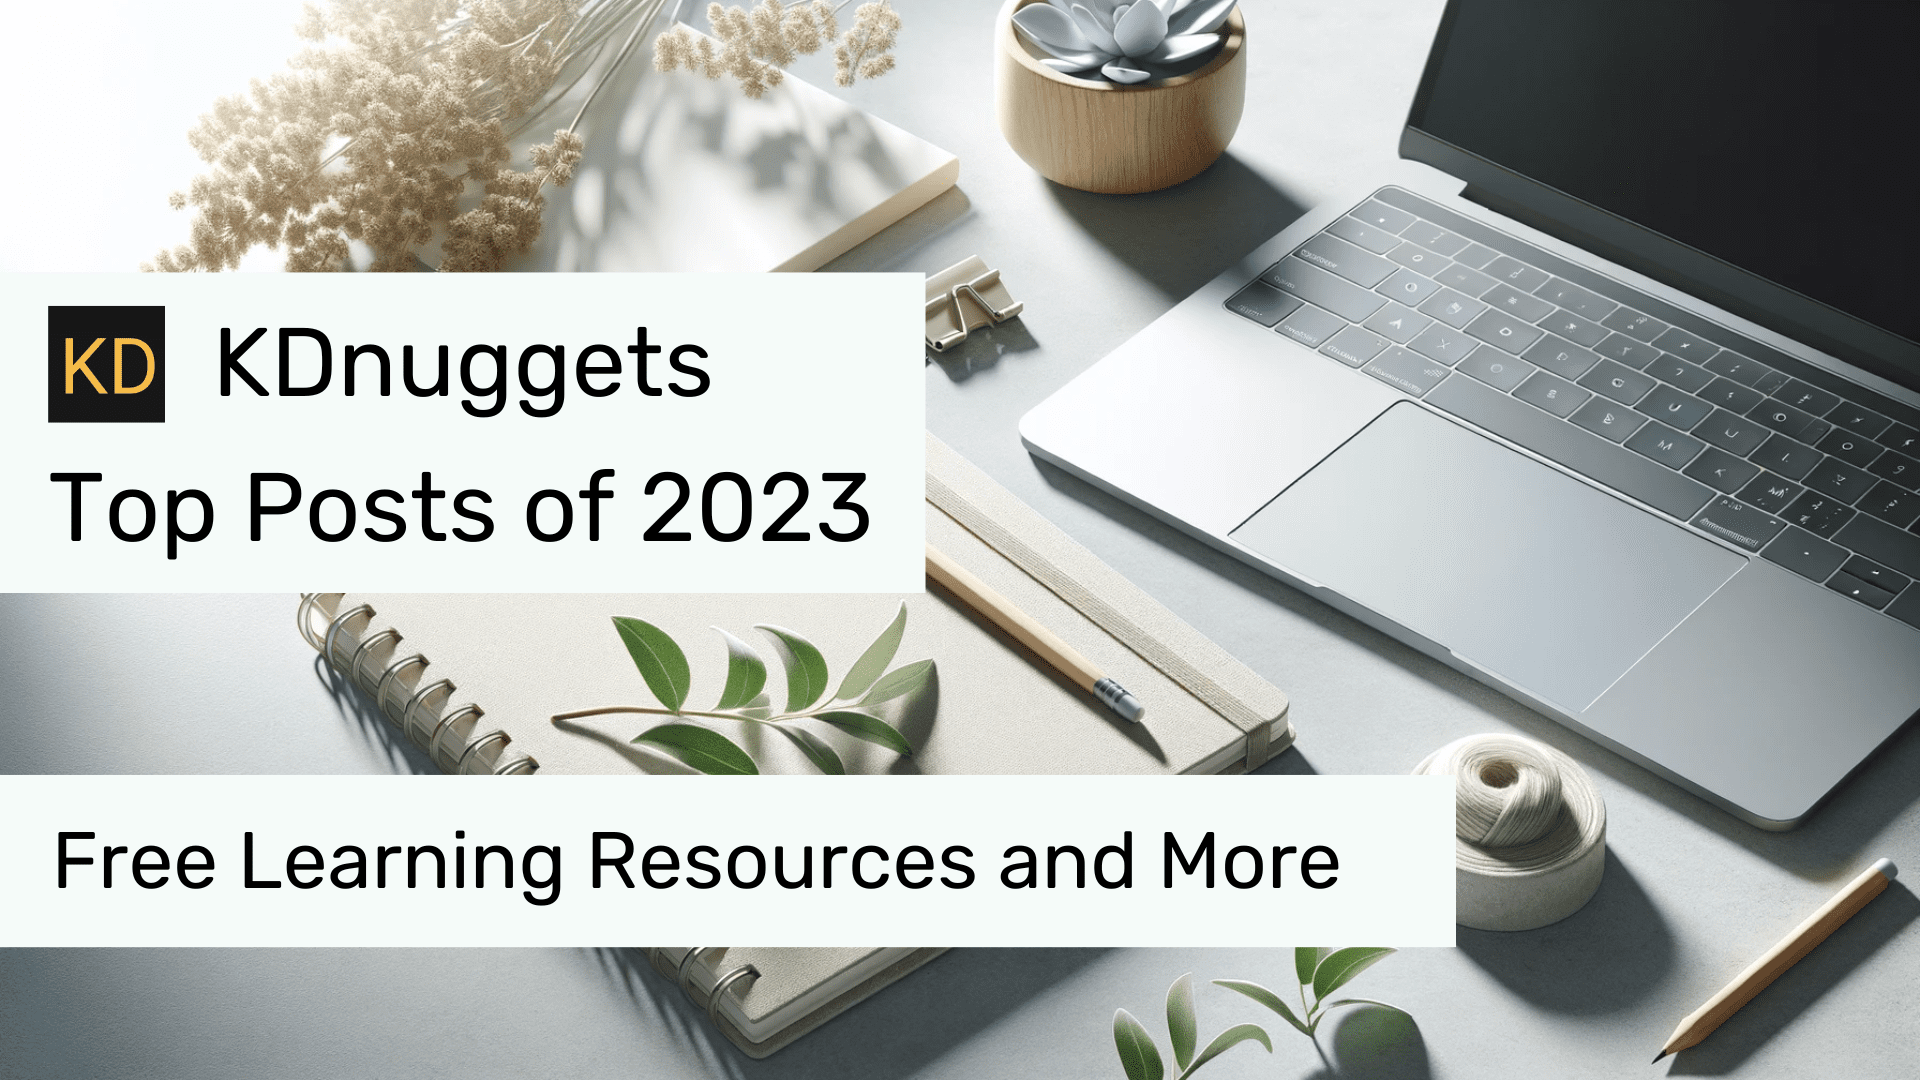 Top KDnuggets Posts of 2023: Free Learning Resources and More